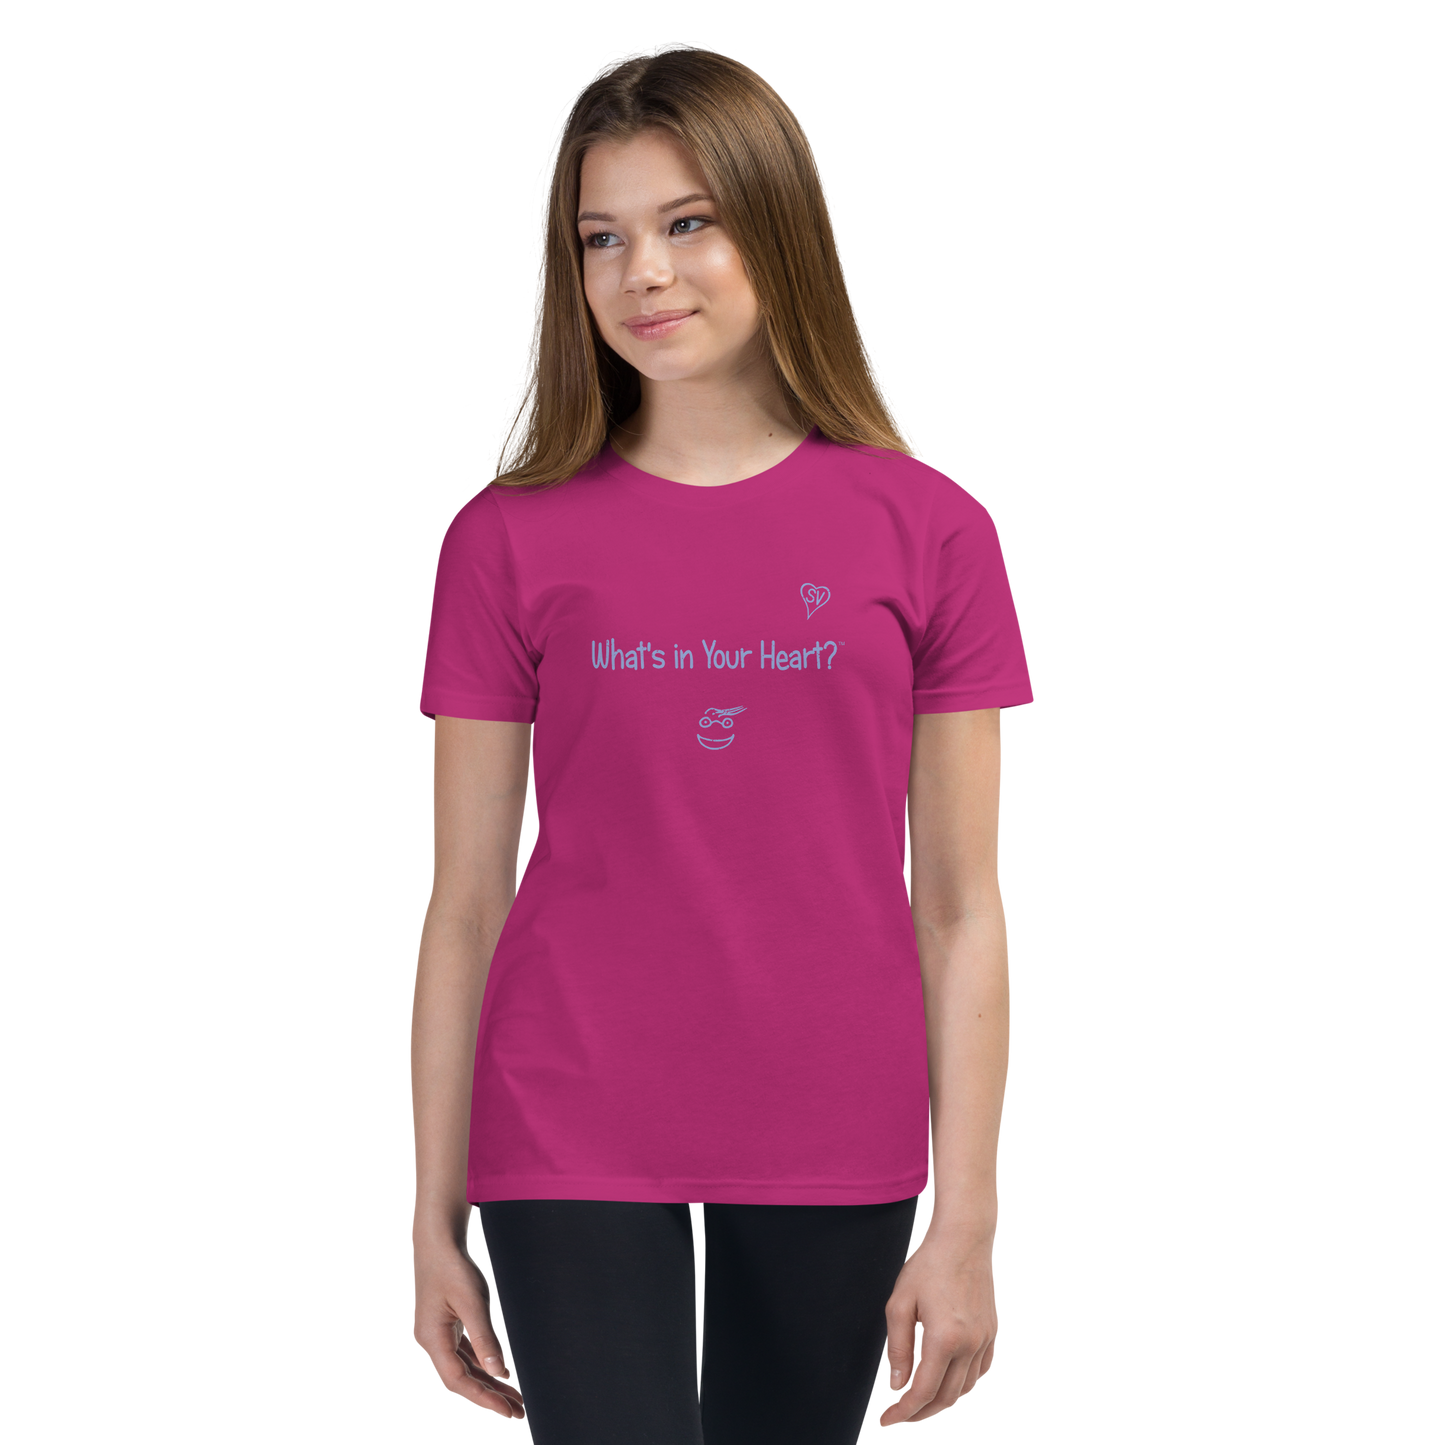 Berry Pink "Heart Full of Virtues" Youth Unisex Short Sleeve T-Shirt